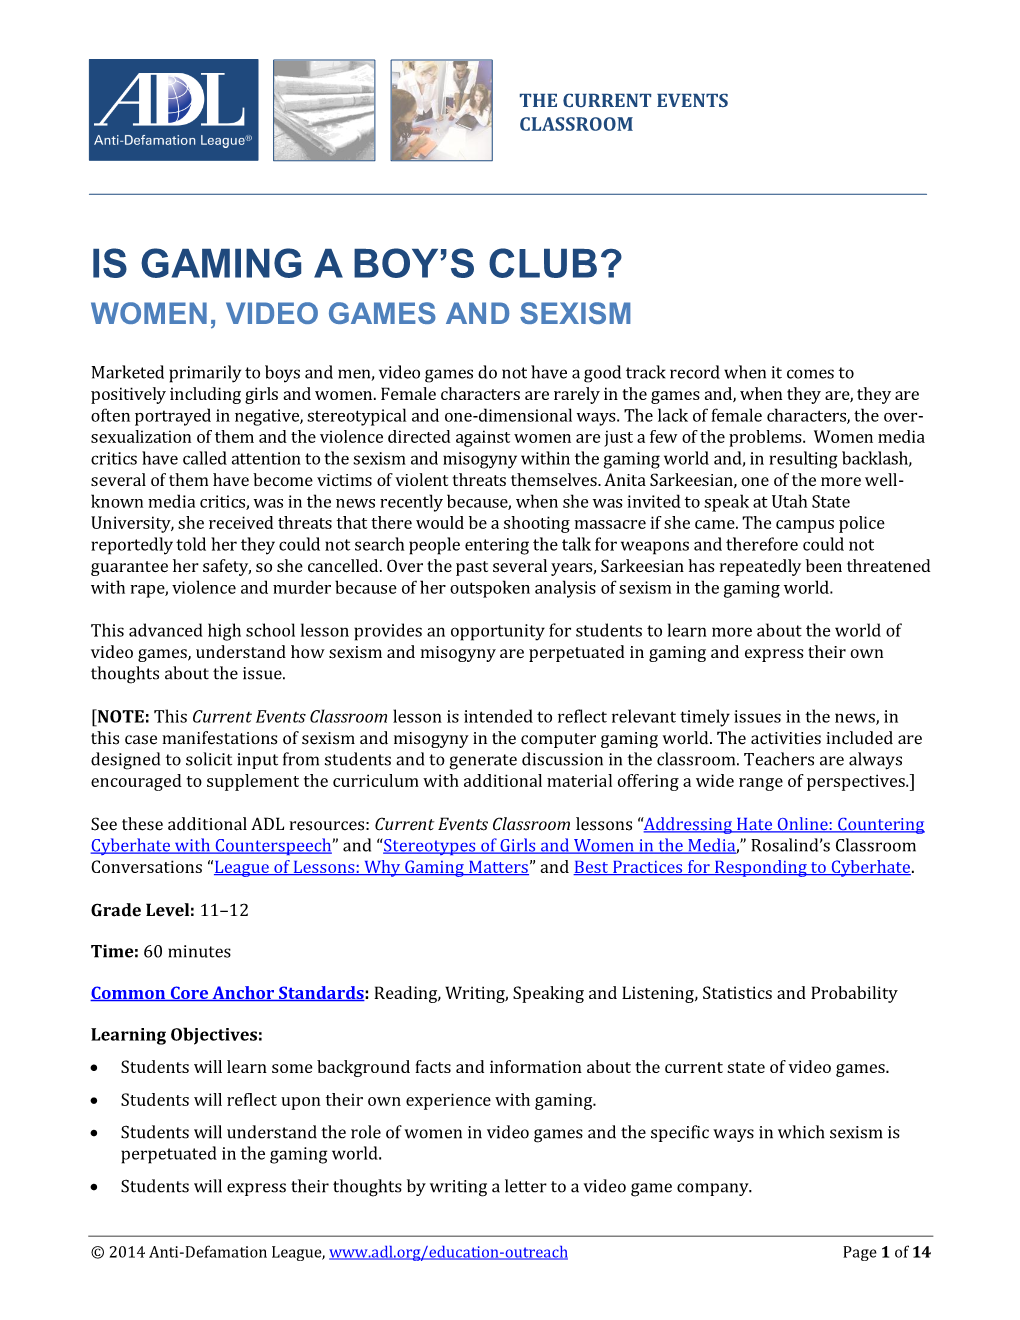 Is Gaming a Boy's Club? Women, Video Games and Sexism